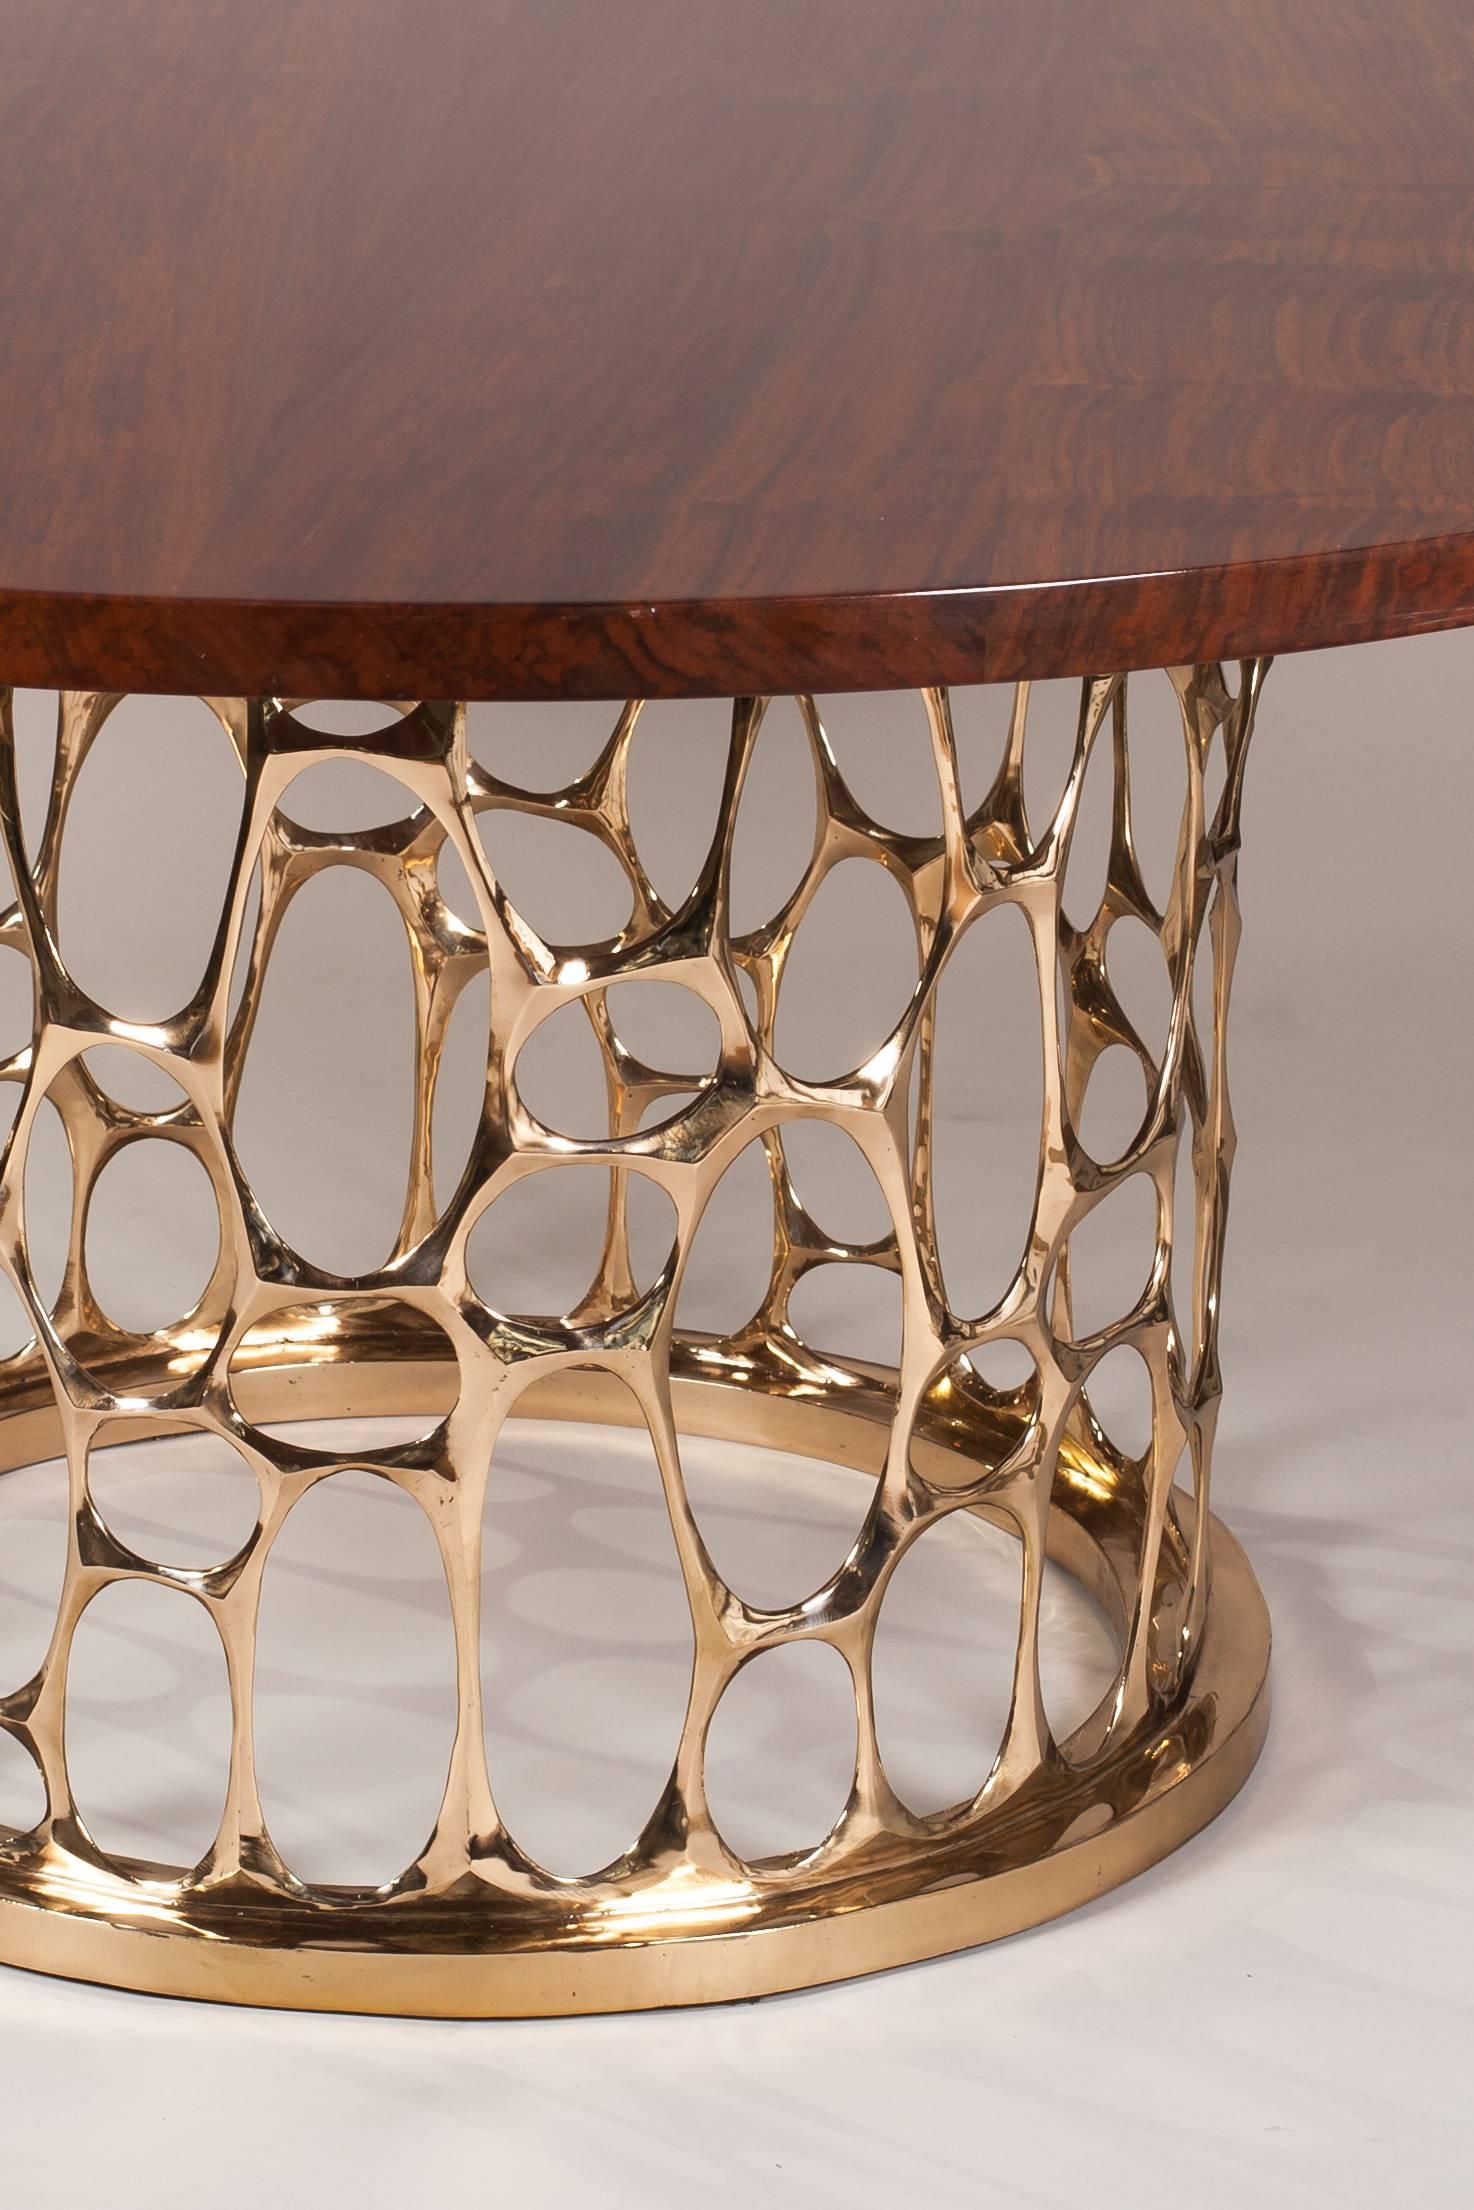 Sculpted bronze base with beautiful Claro Walnut top. One of a kind, single production piece.

The Homage to Gaudi table is crafted using the lost-wax casting method; a painstaking process that allows the artist to prior create and sculpt his